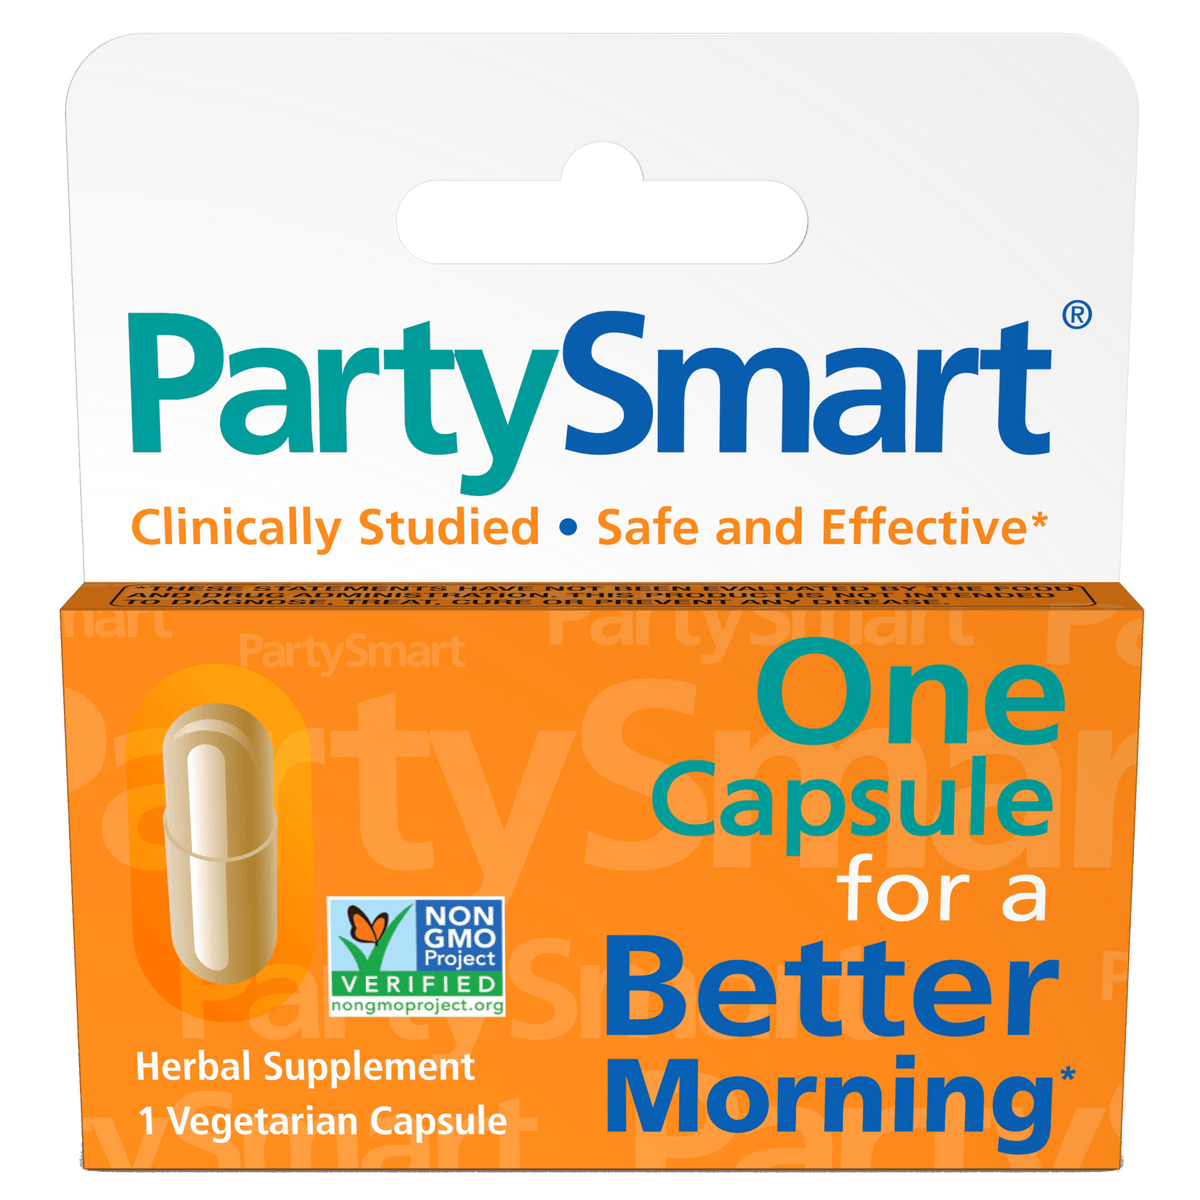 Himalaya PartySmart Gummies, 2 Gummies for A Better Morning, Liver Support, Better Morning After Drinking, Plant-Based, Vegan, Gluten Free, No